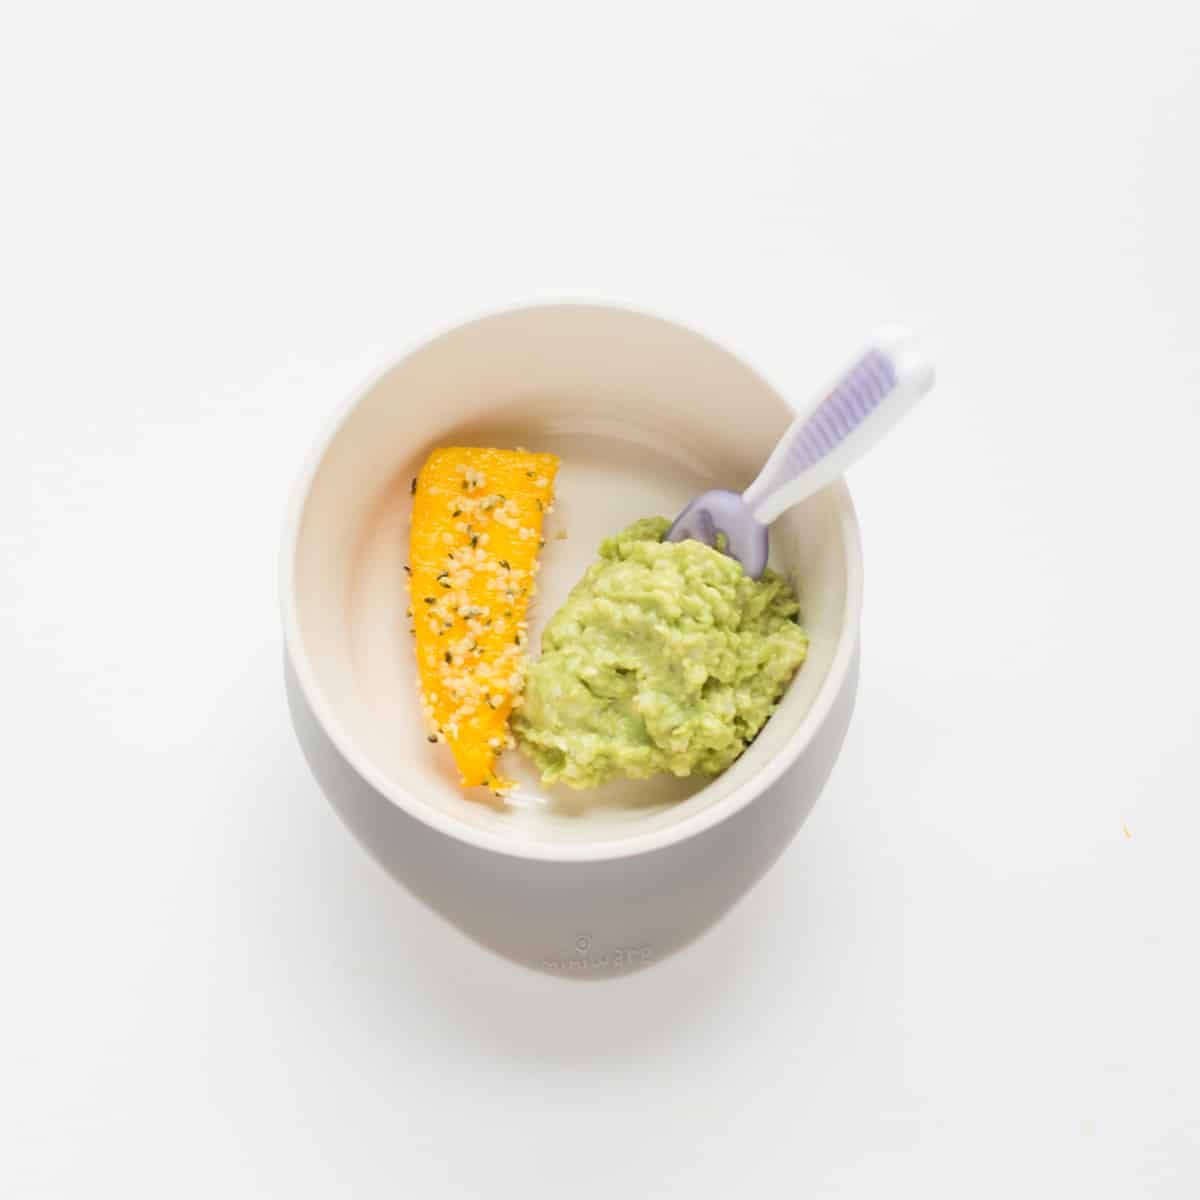 mashed avocado and quinoa with a big strip of mango in a baby bowl with a spoon.